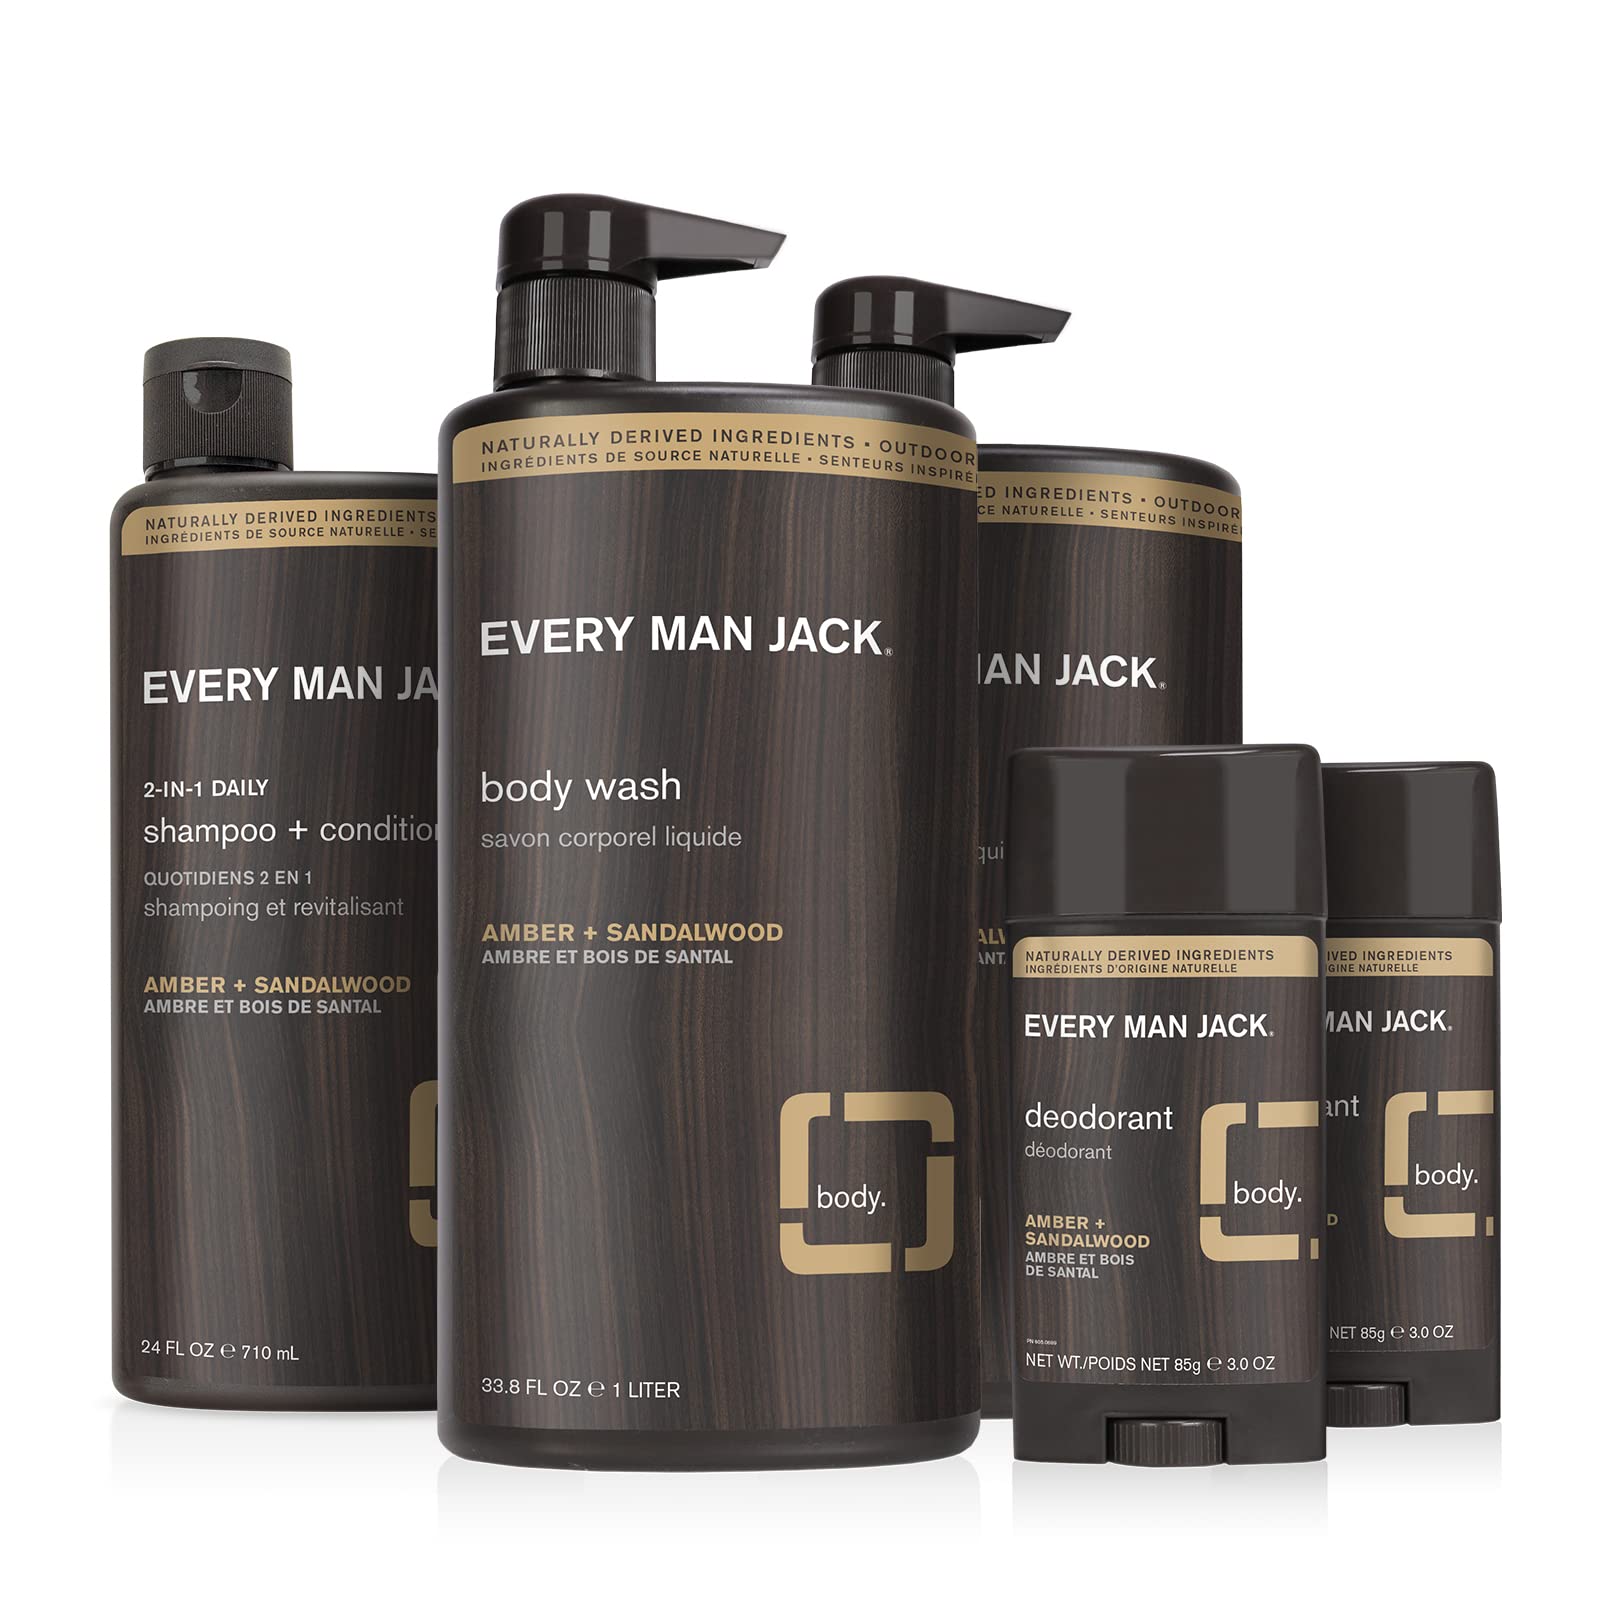 Every Man Jack Men’s Body + Hair Bundle - Cleanse and Hydrate All Skin & Hair Types with Clean Ingredients and an Amber + Sandalwood Scent -Liter Body Wash Twin Pack, Deo Twin Pack, and 2-in-1 Shampoo